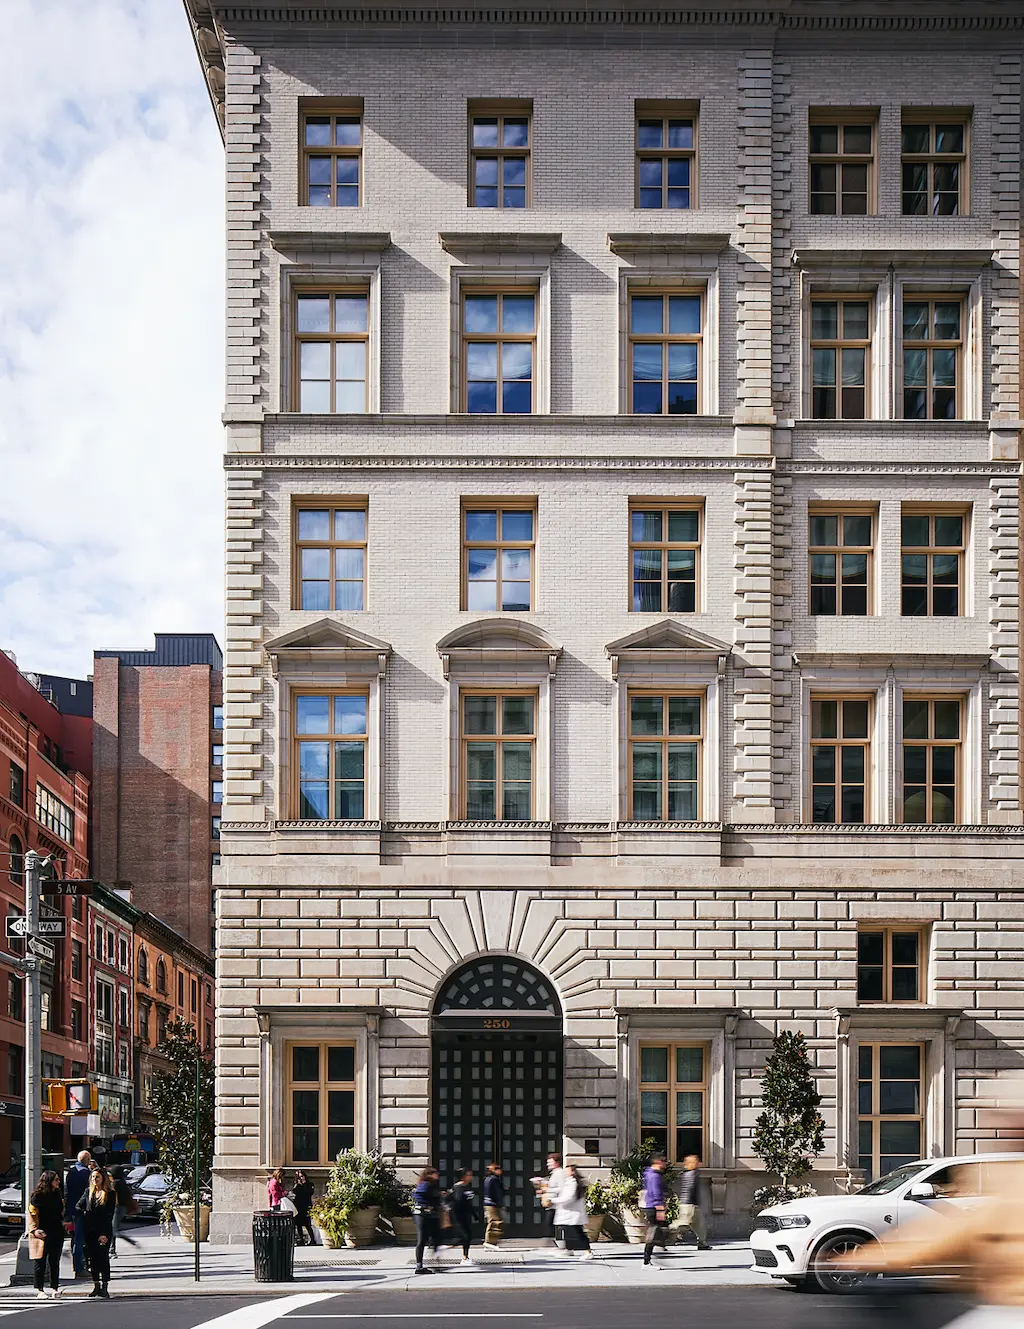 The Fifth Ave Hotel features an impressive architectural design.